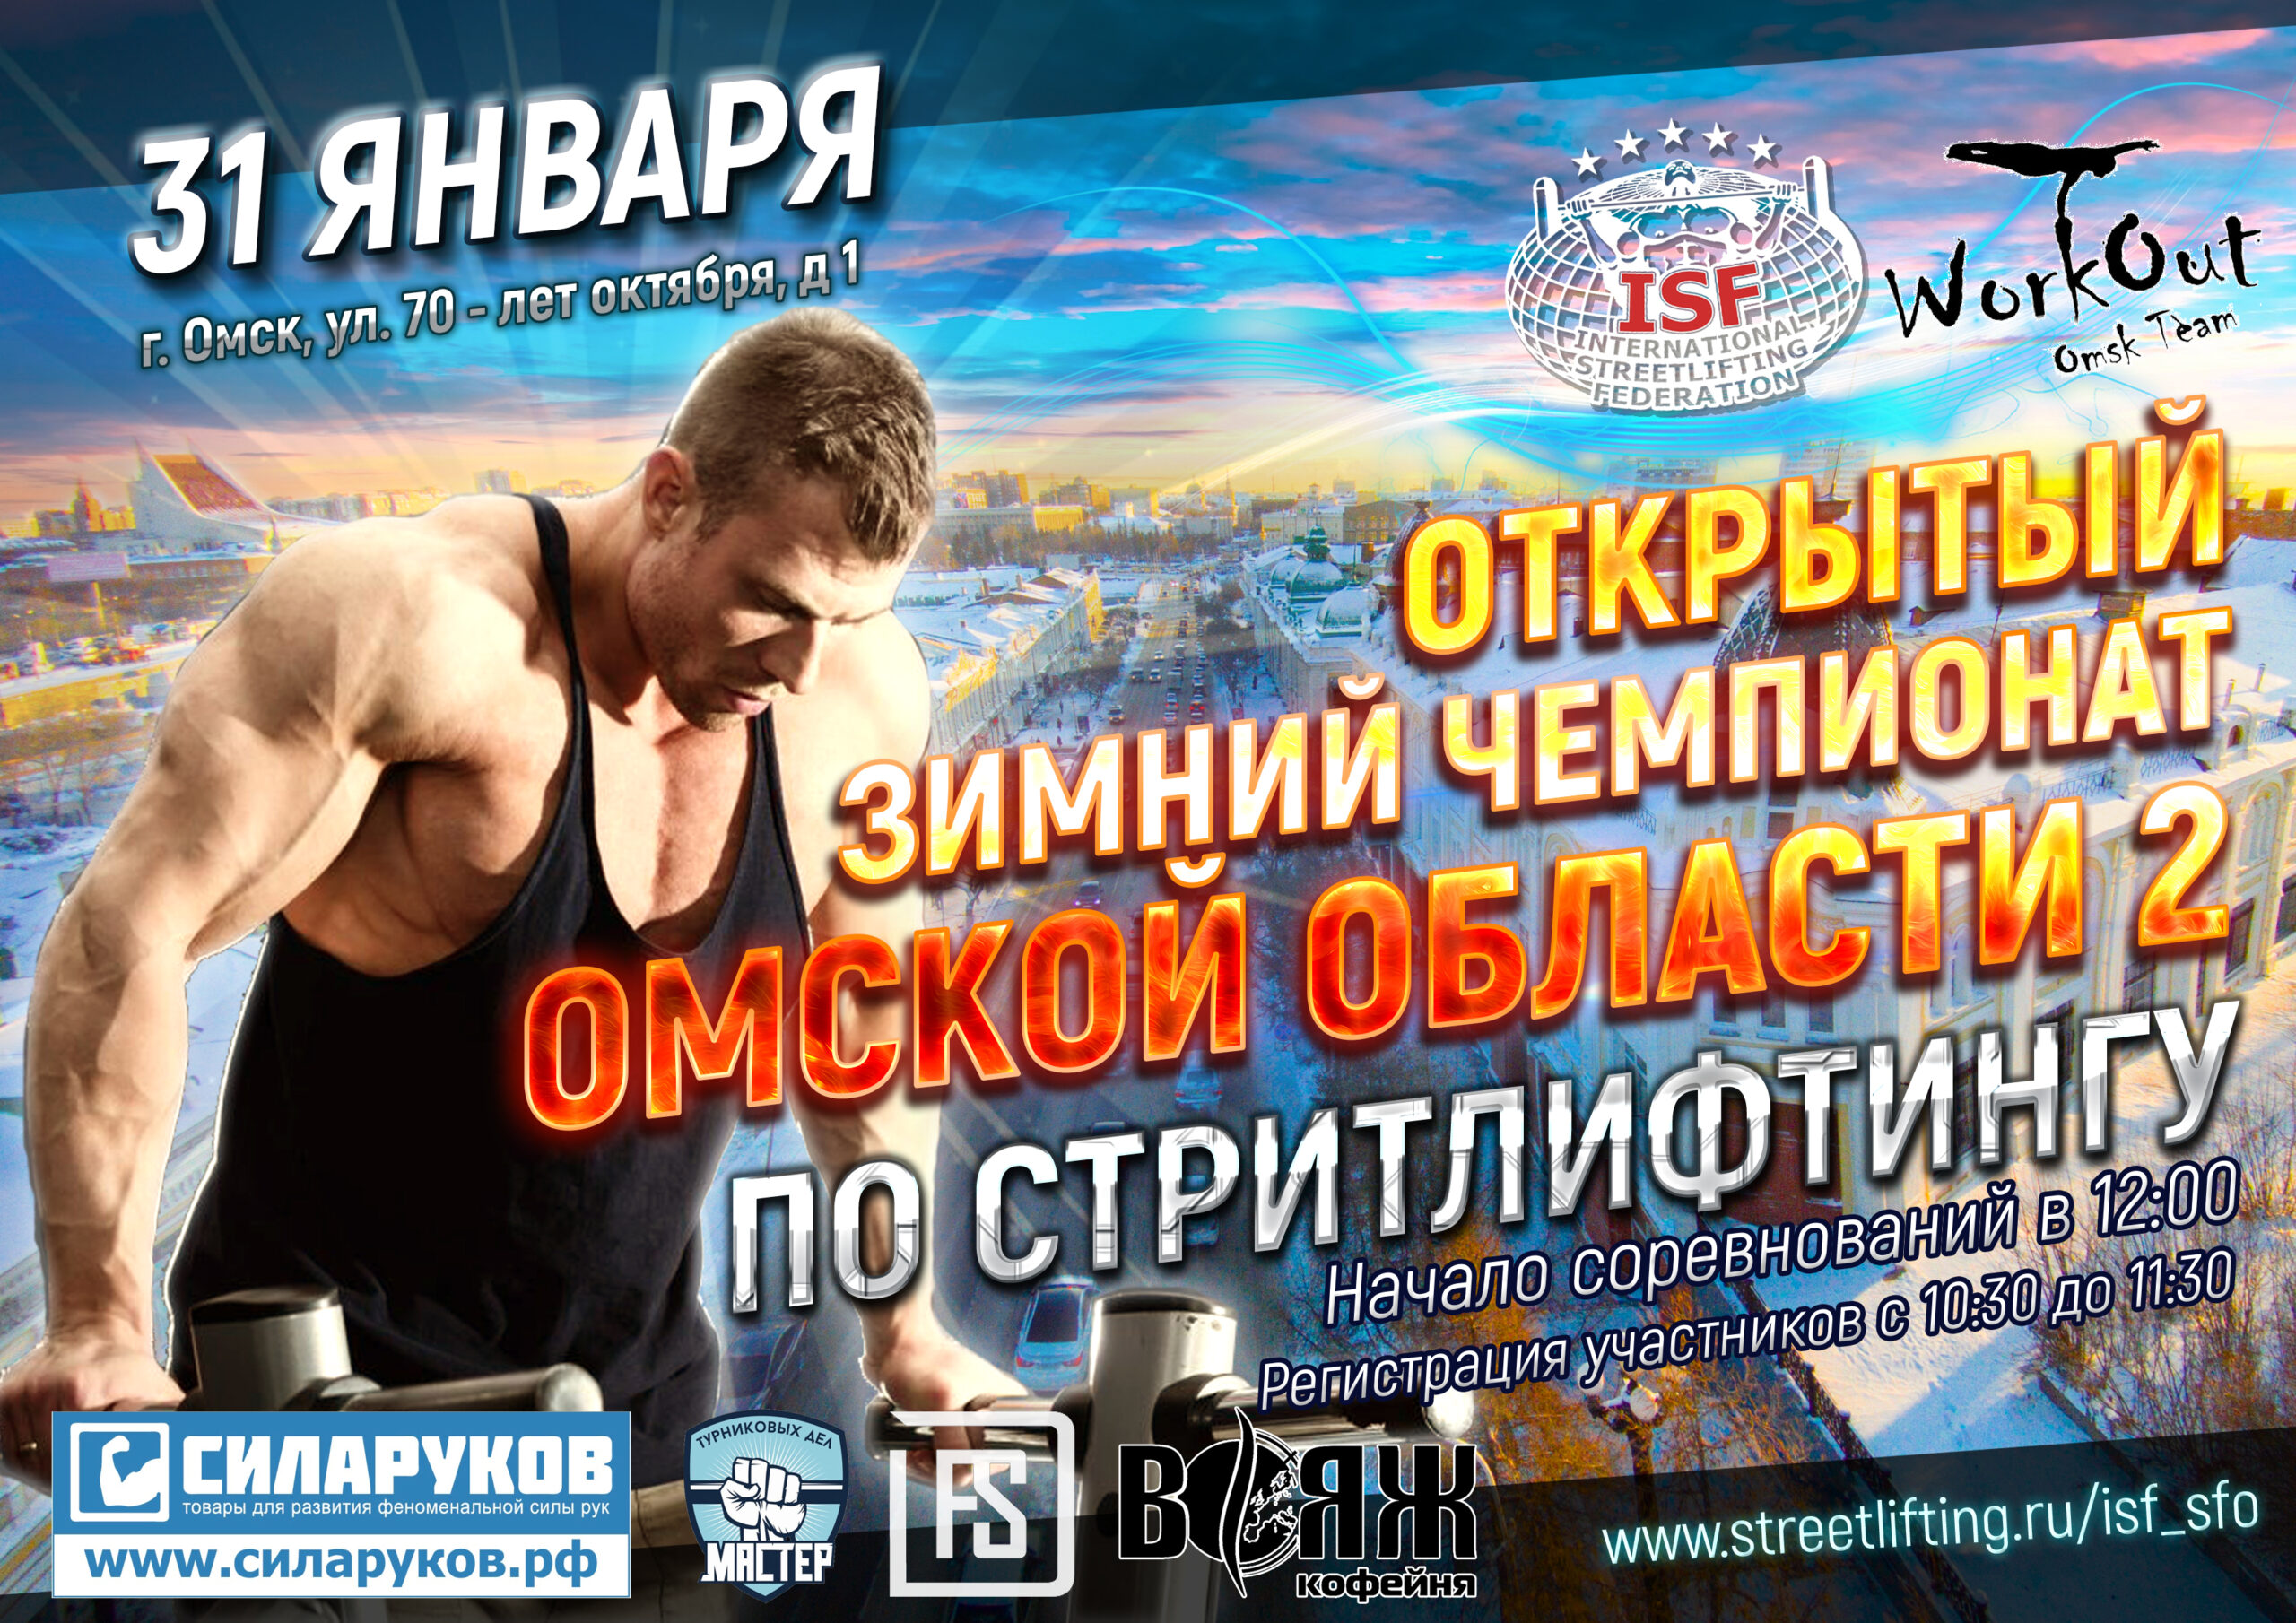 31.01.2021-Open Championship of the Omsk region, Omsk, Russia